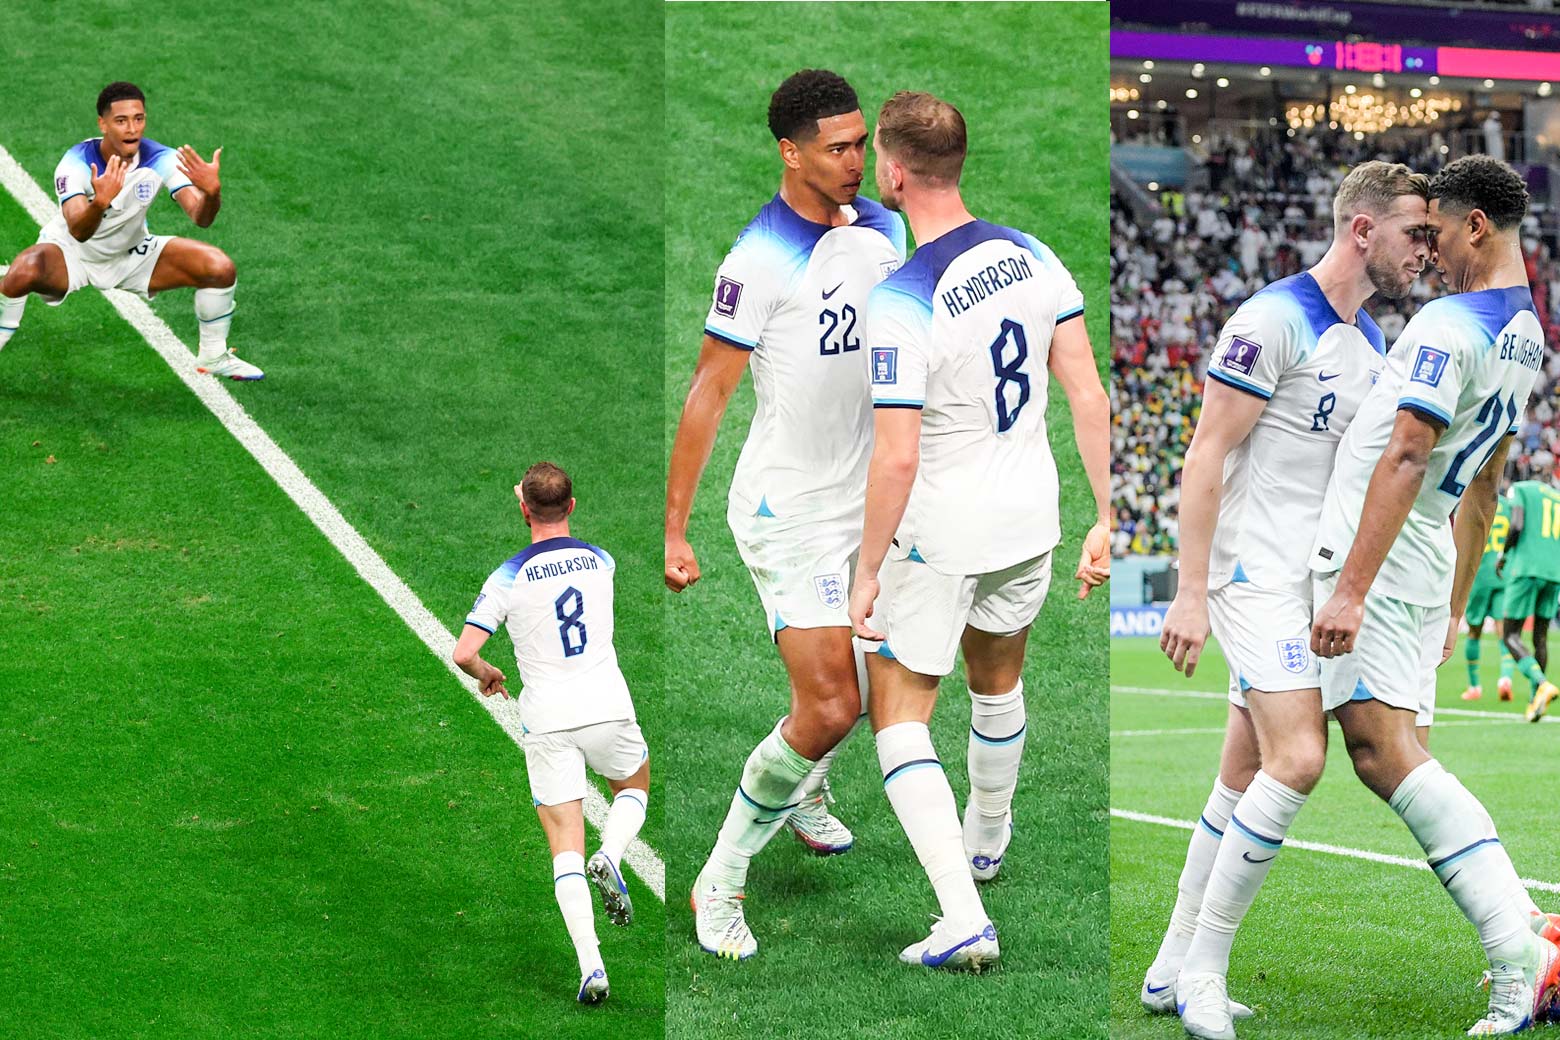 A collage of three images, from L-R: Jude Bellingham squats and gestures with his hands while Jordan Henderson runs toward him. Jude Bellingham and Jordan Henderson stand face to face. Jude Bellingham and Jordan Henderson press their bodies against one another, from forehead to knee. 